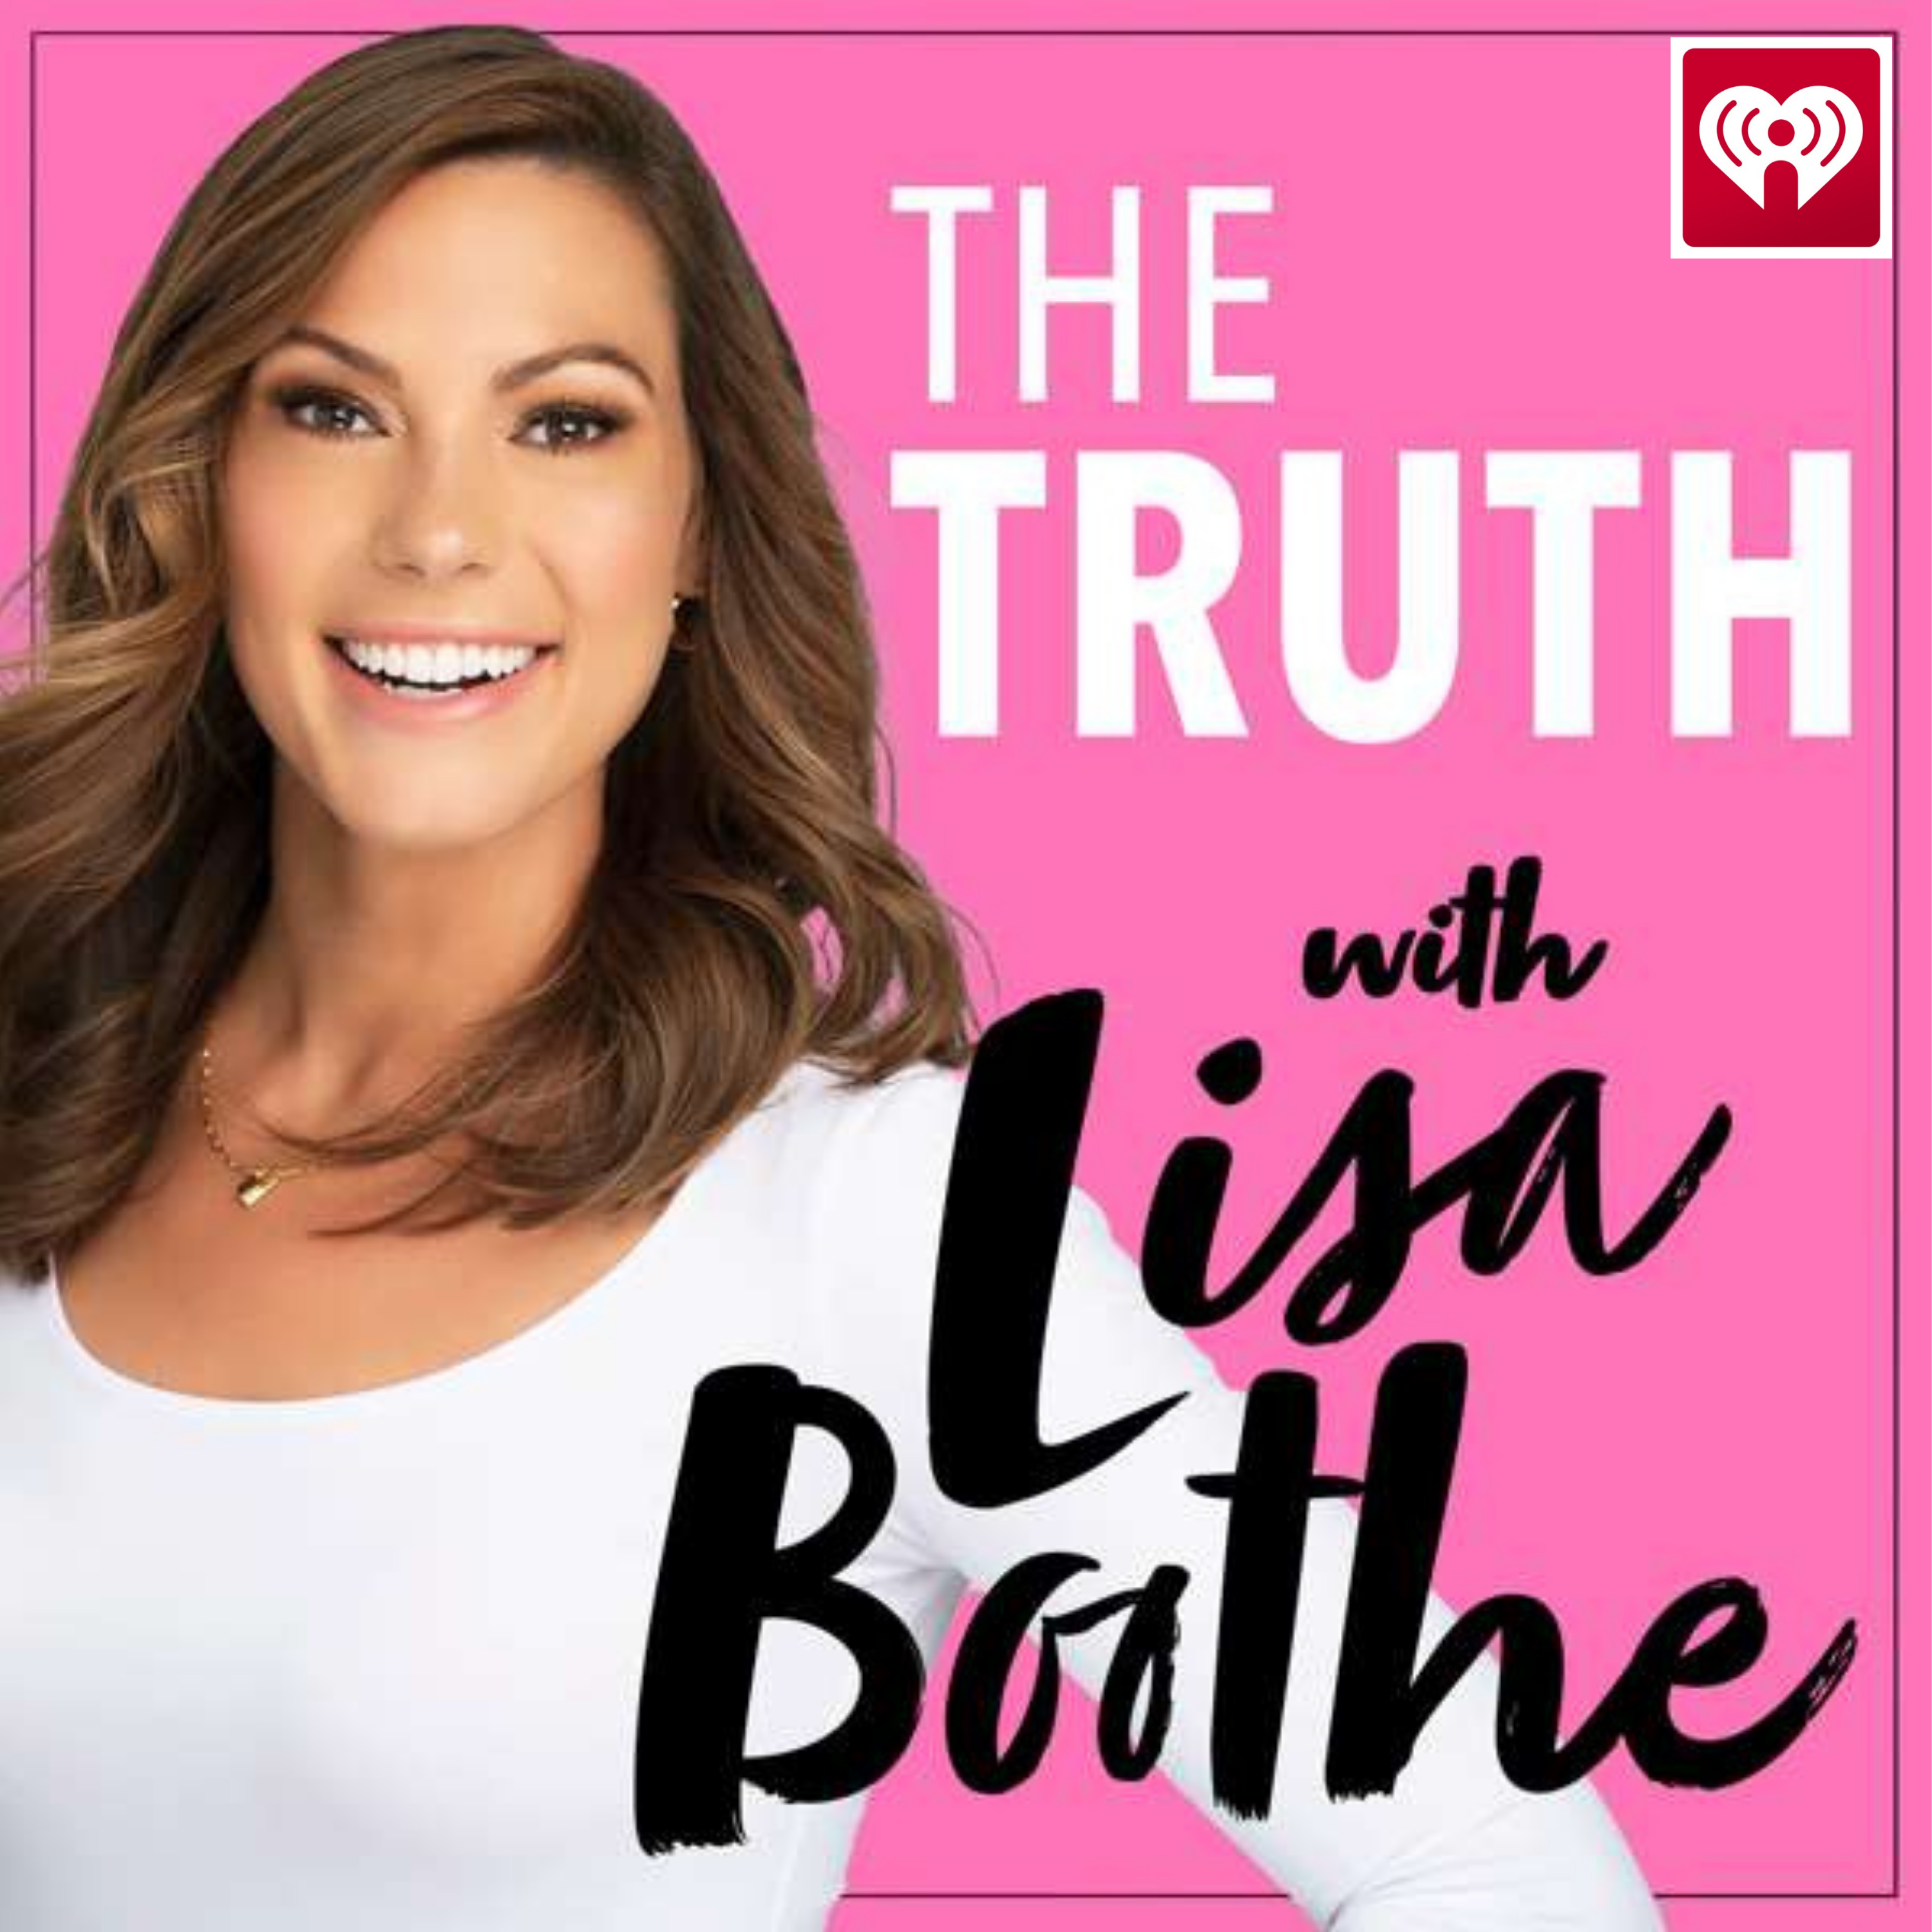 The Truth with Lisa Boothe: Chasing Chaos with Julio Rosas